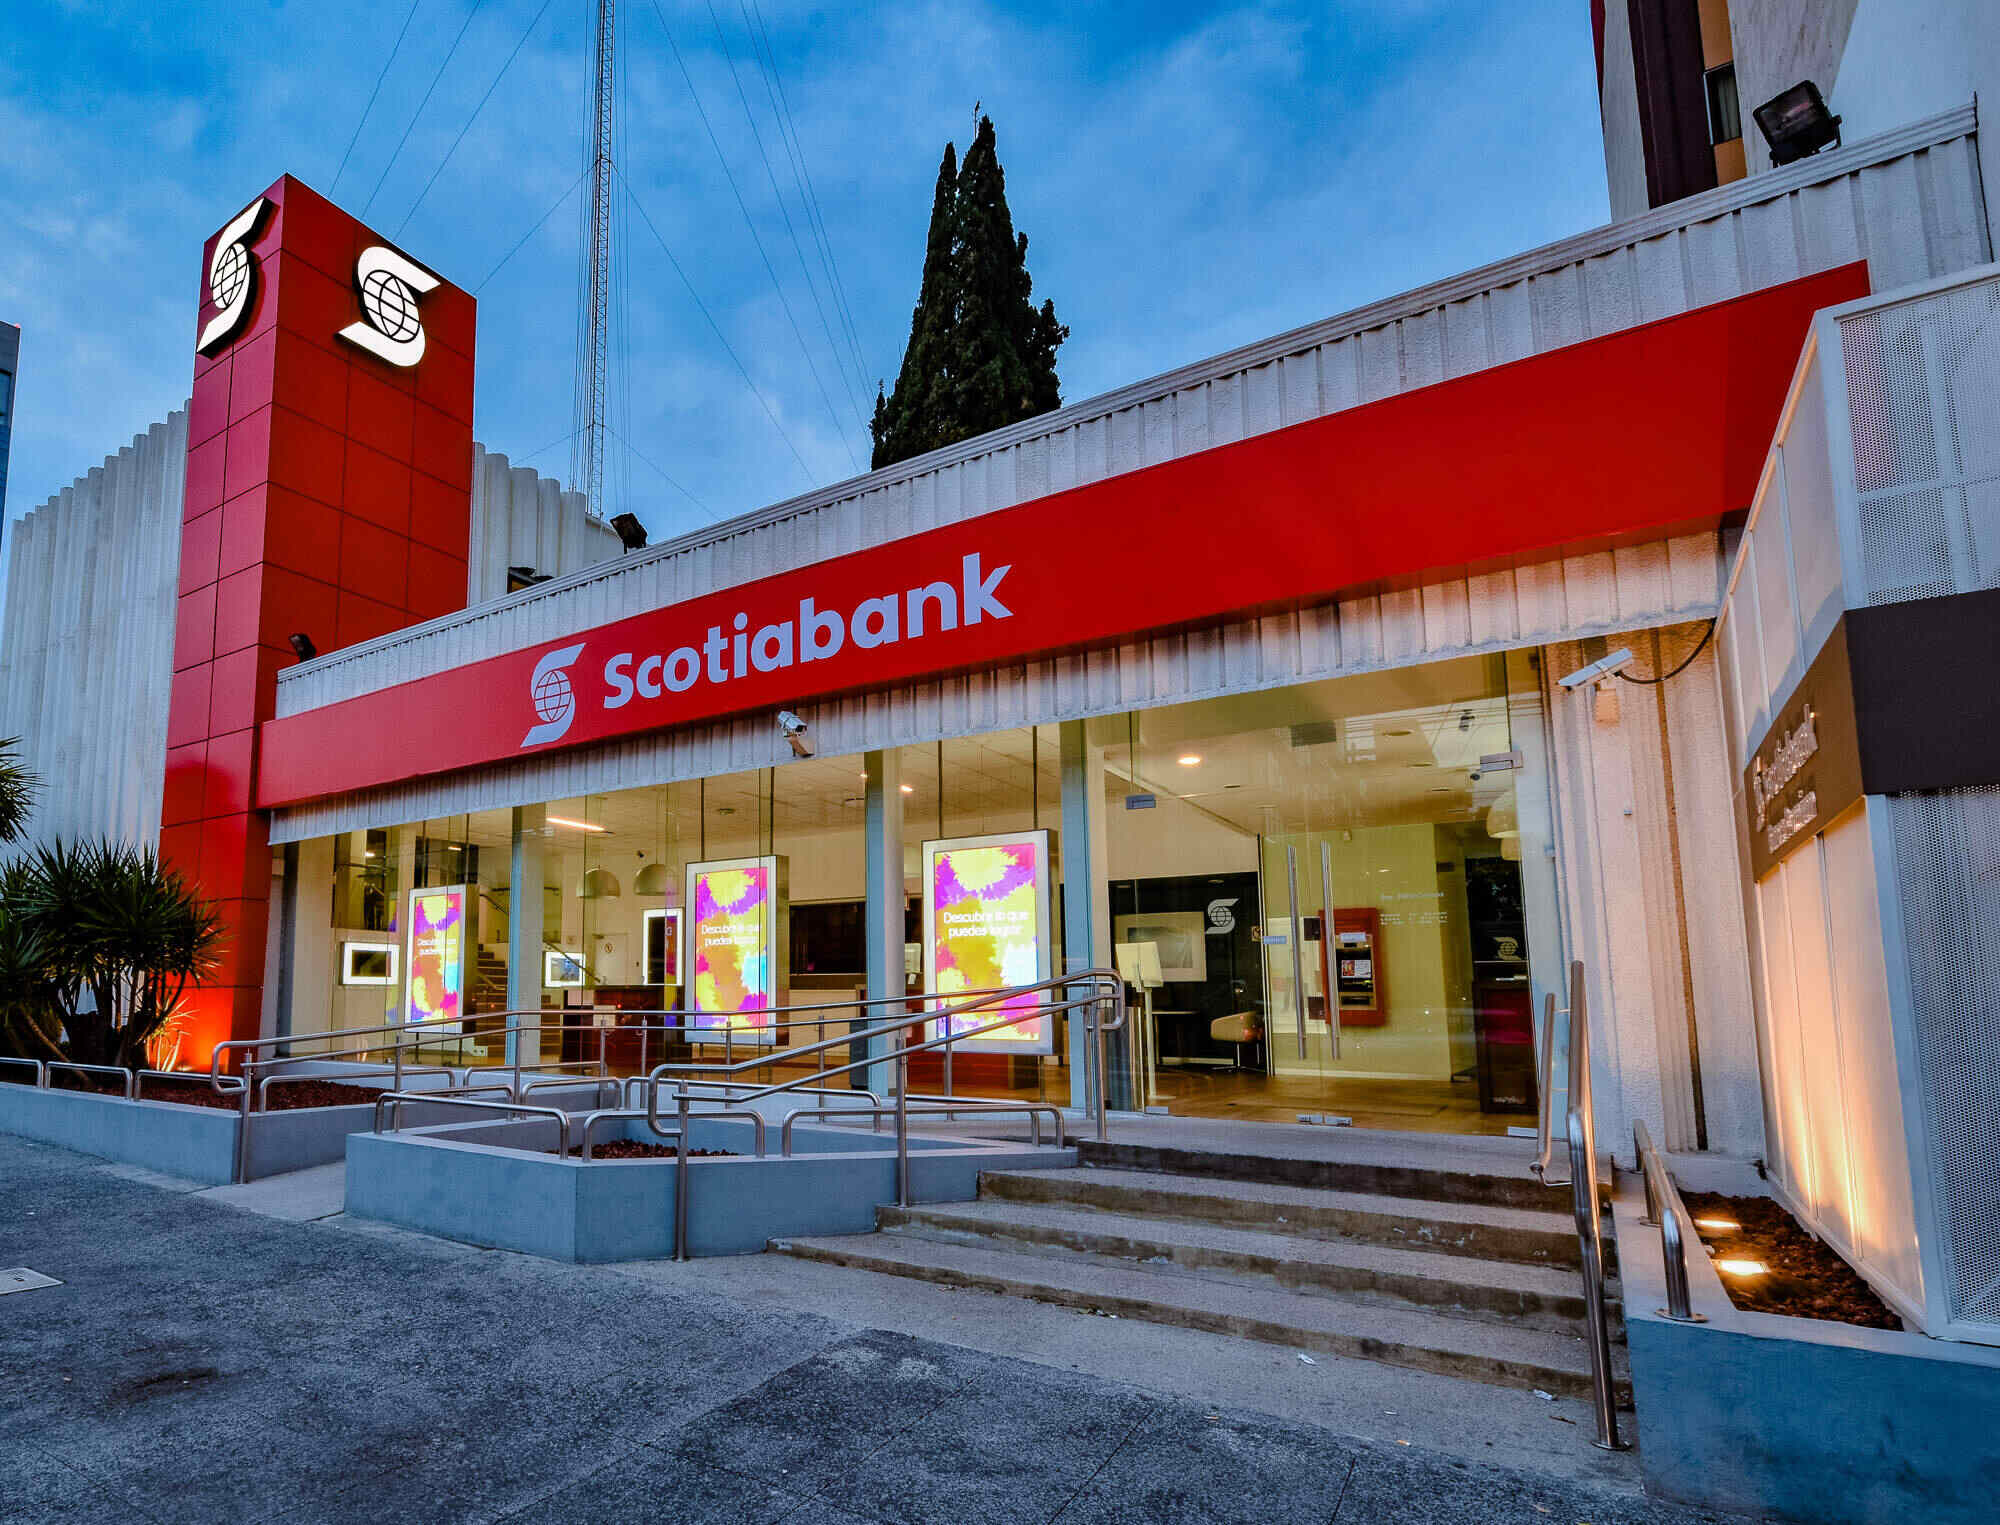 18-captivating-facts-about-scotiabank-inverlat